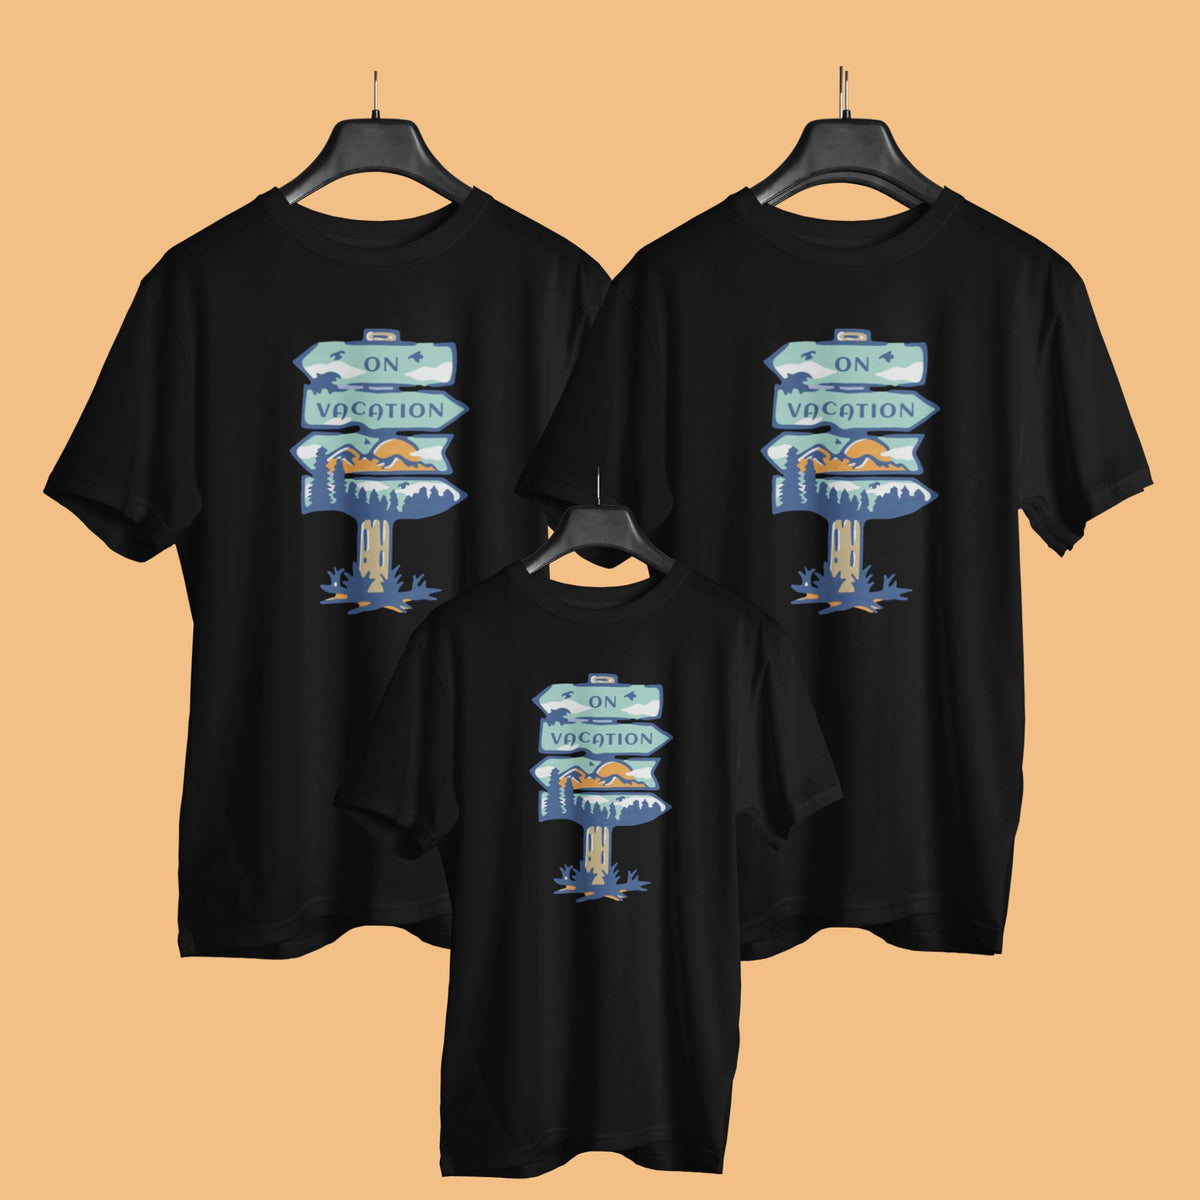 on-vacation-matching-family-black-t-shirts-for-mom-dad-son-daughter-gogirgit-hanger